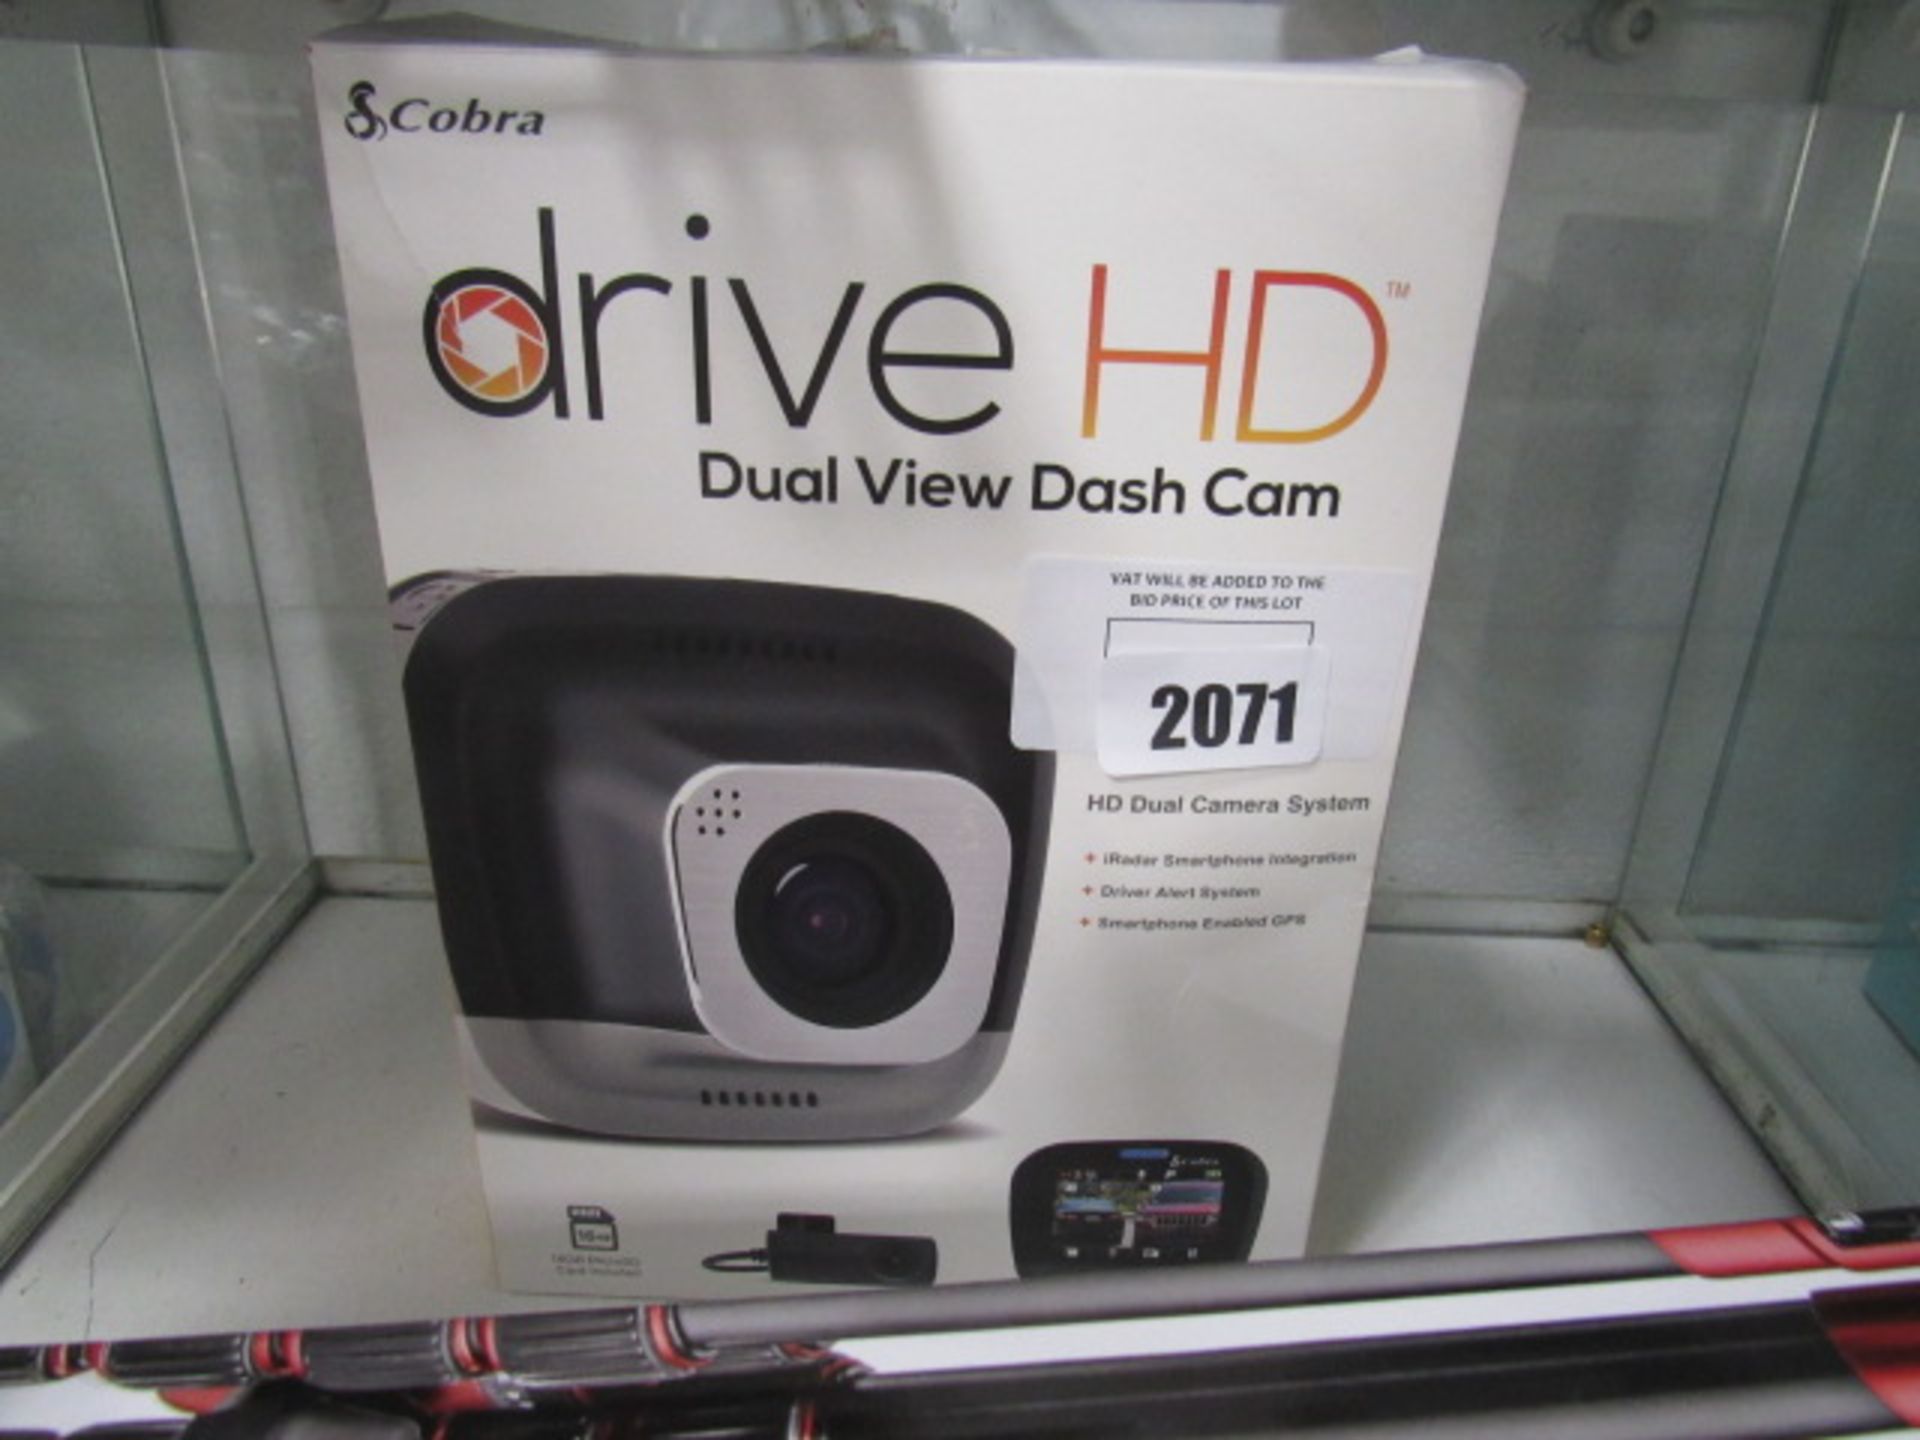 Drive HD duel view dash cam in box